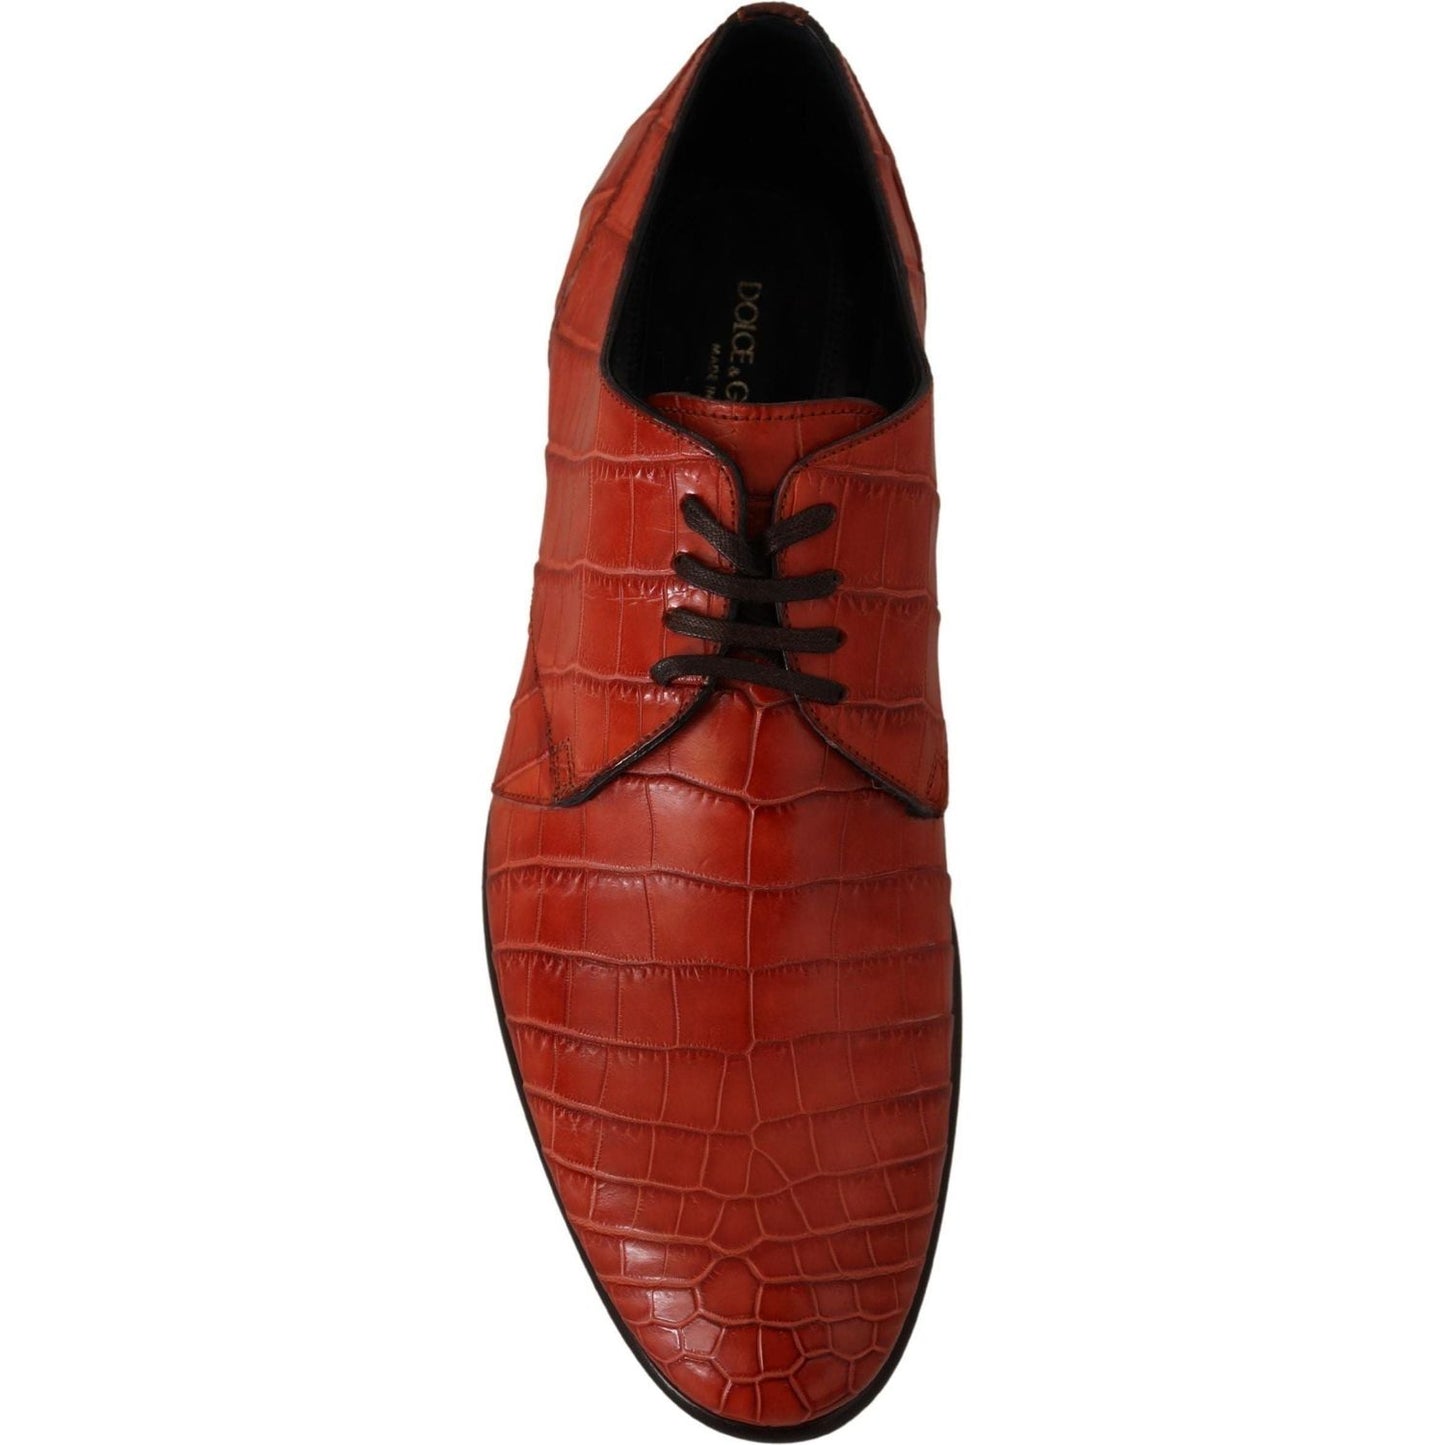 Dolce & Gabbana Exquisite Exotic Croc Leather Lace-Up Dress Shoes orange-exotic-leather-dress-derby-shoes IMG_2152-scaled-2aad2415-44e.jpg